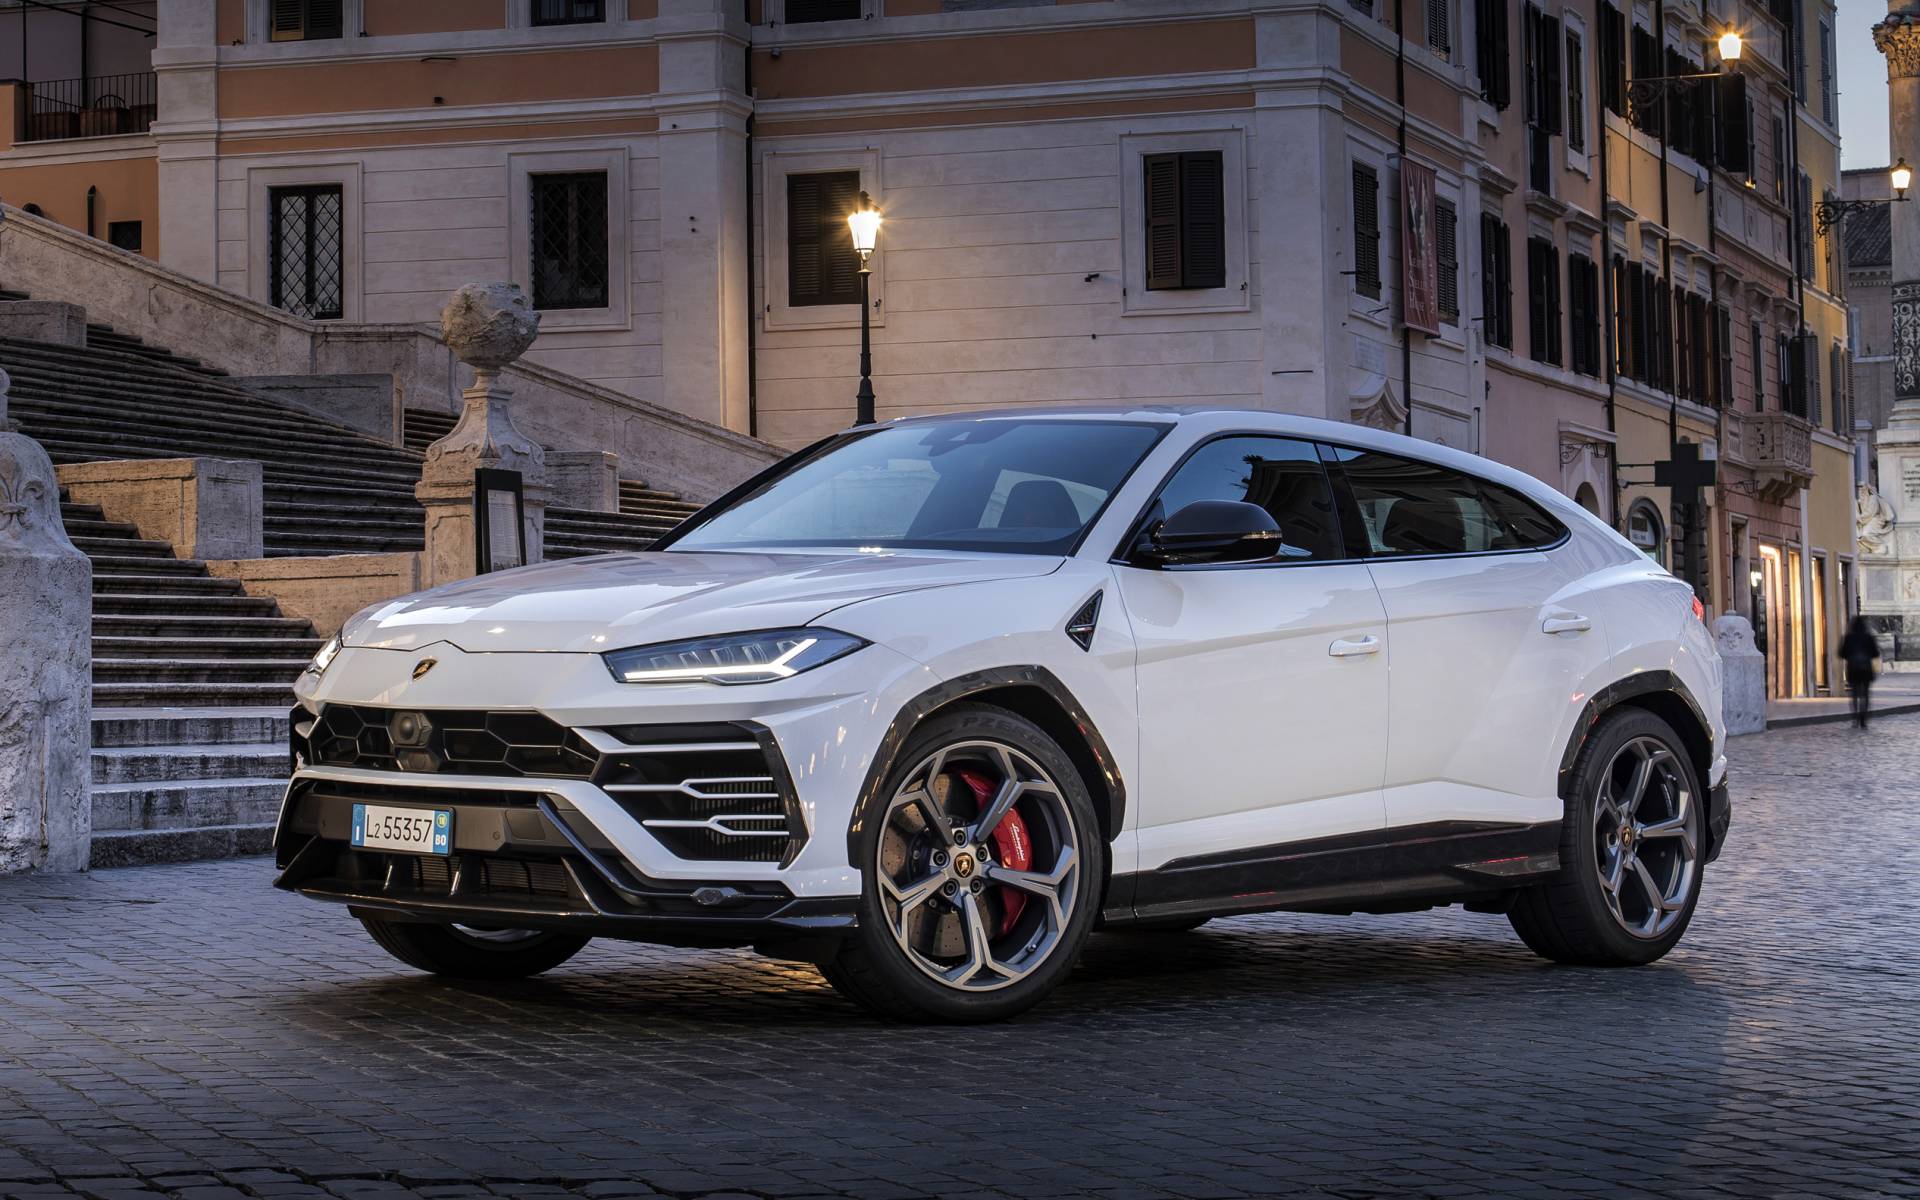 2020 Lamborghini Urus - News, reviews, picture galleries and videos - The  Car Guide